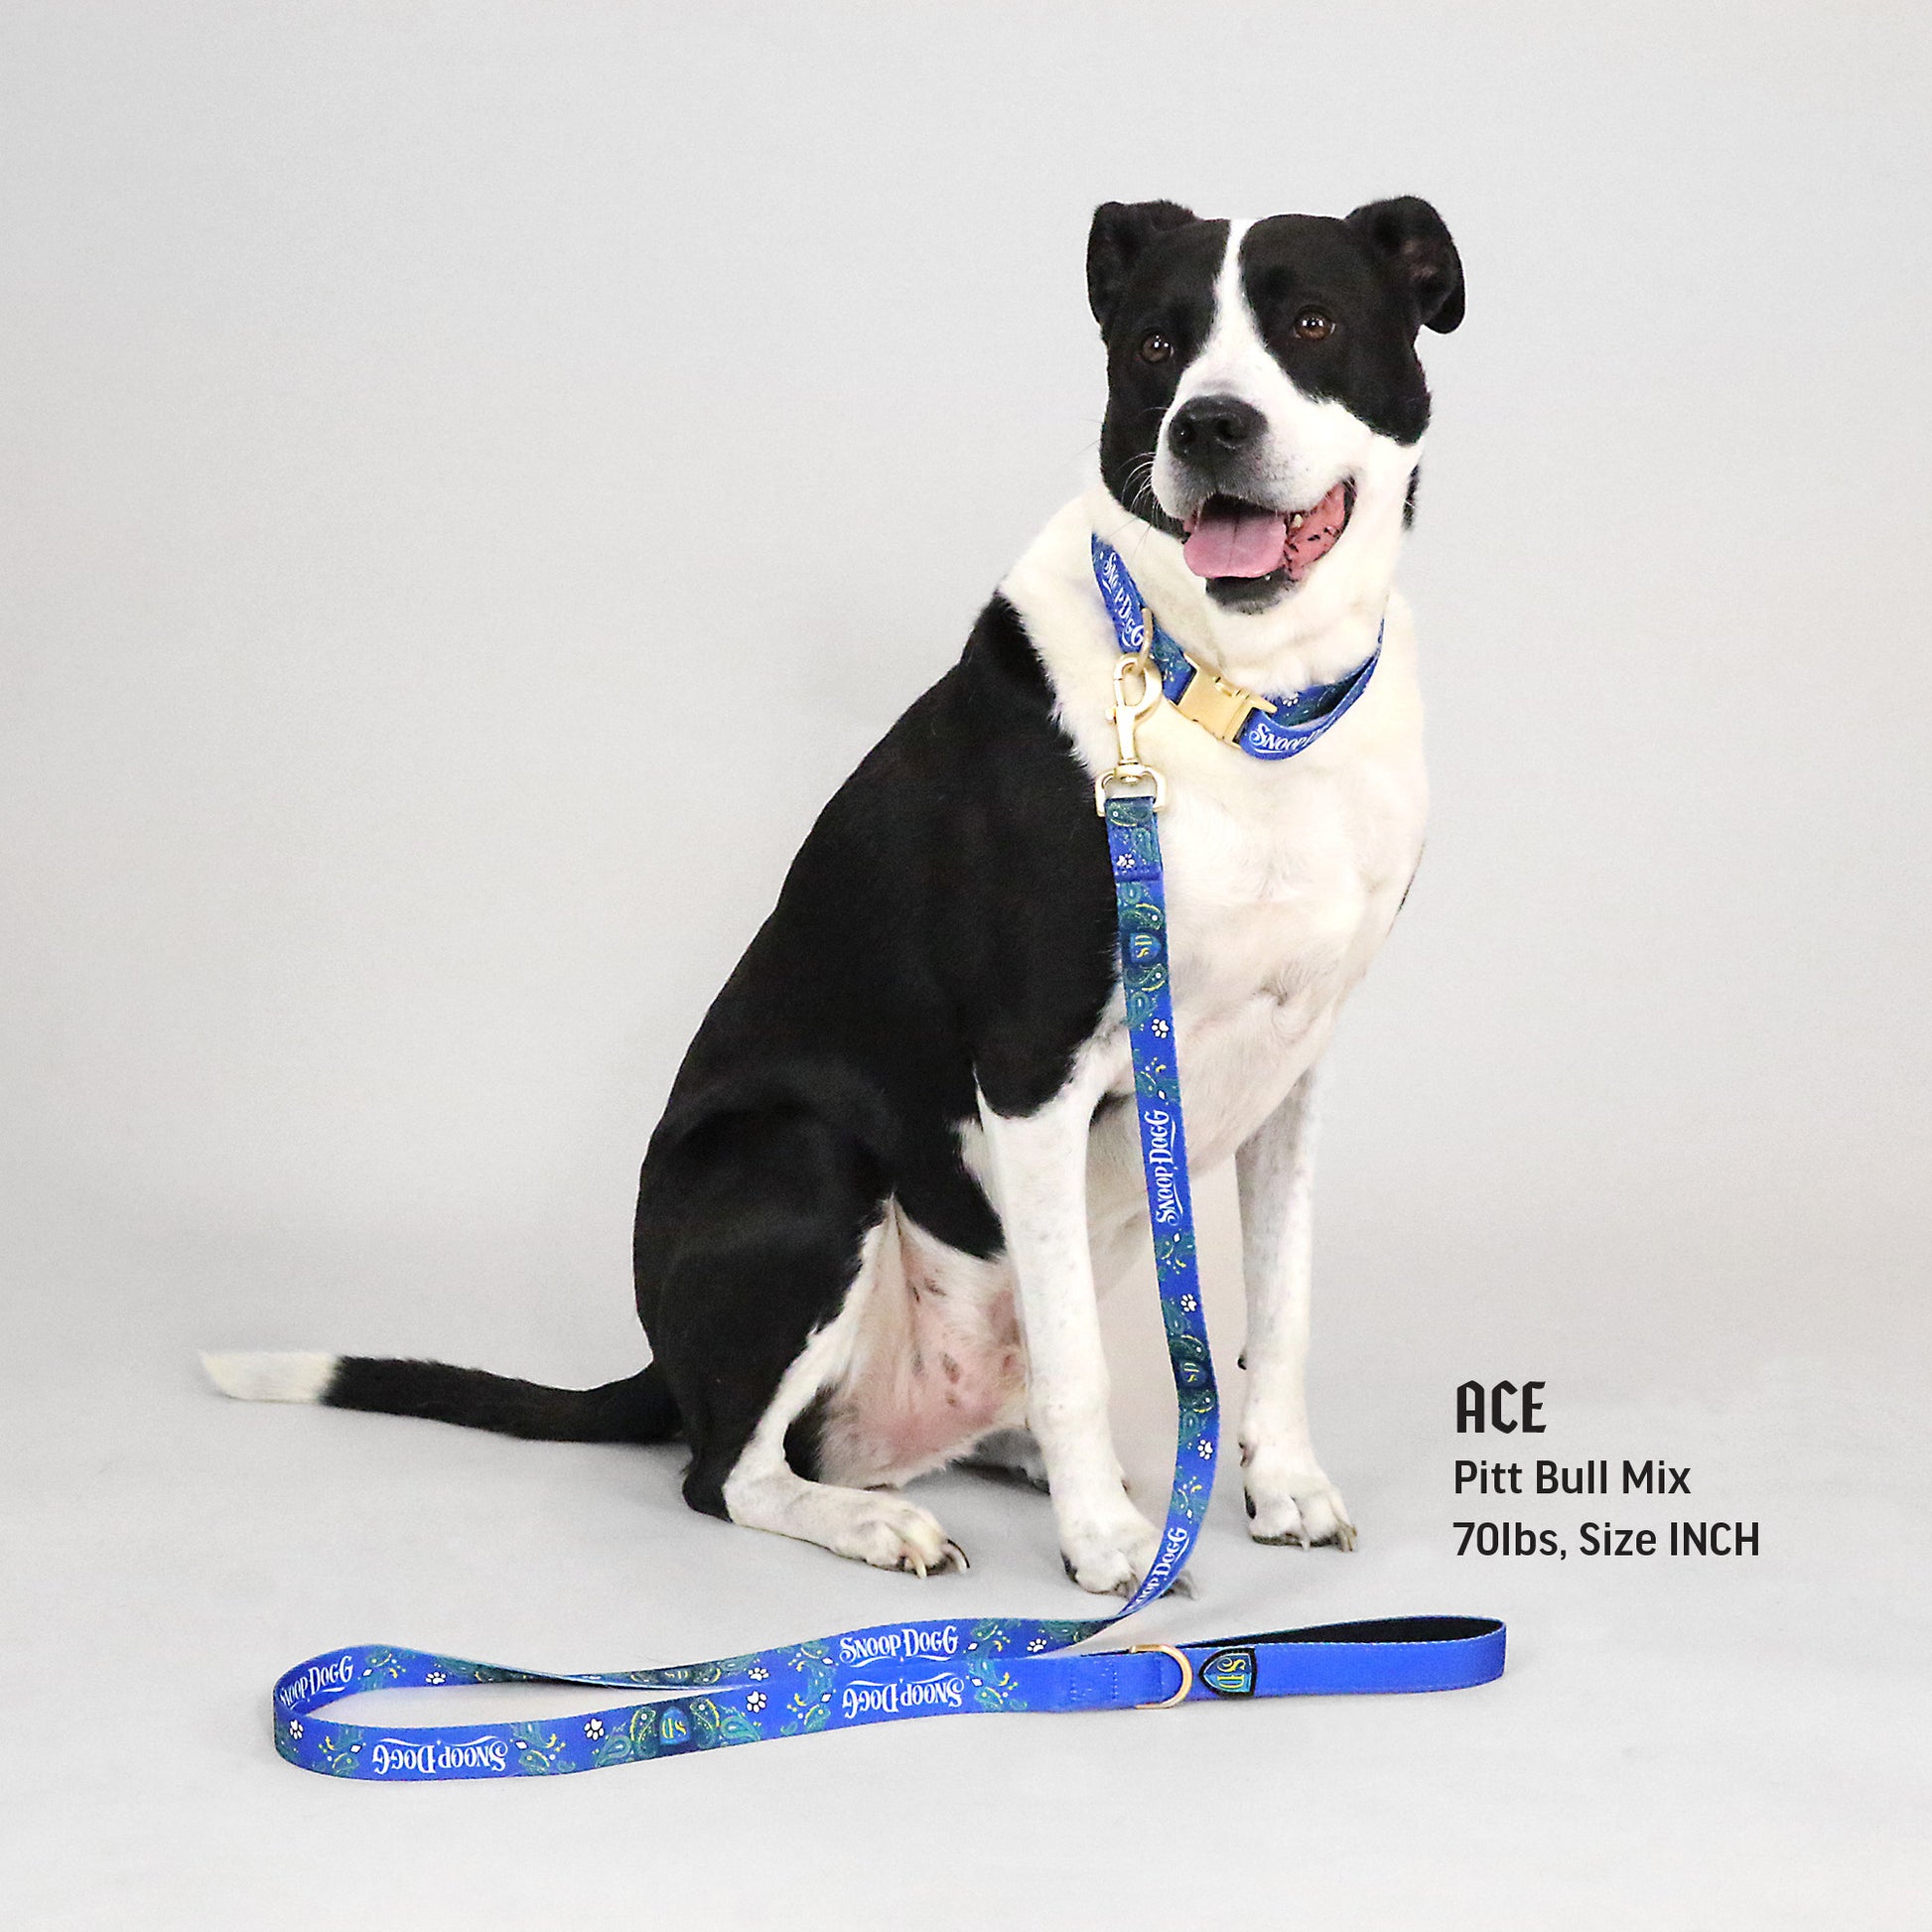 Ace the Pitt Bull Mix wearing the Halftime Deluxe Pet Lead in size INCH.